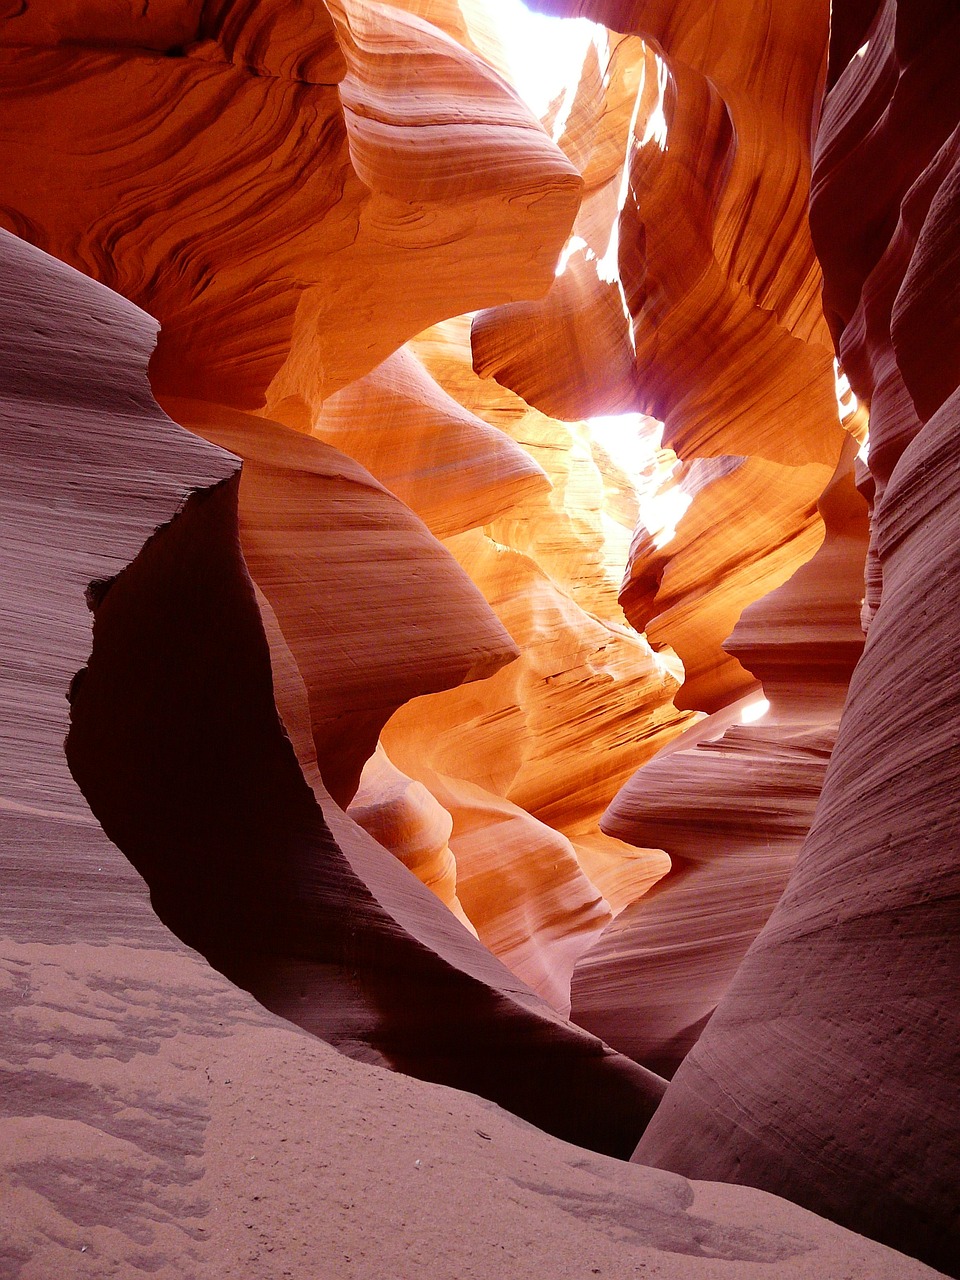 Antelope Canyon Adventure: Hiking, Photography, and Dining